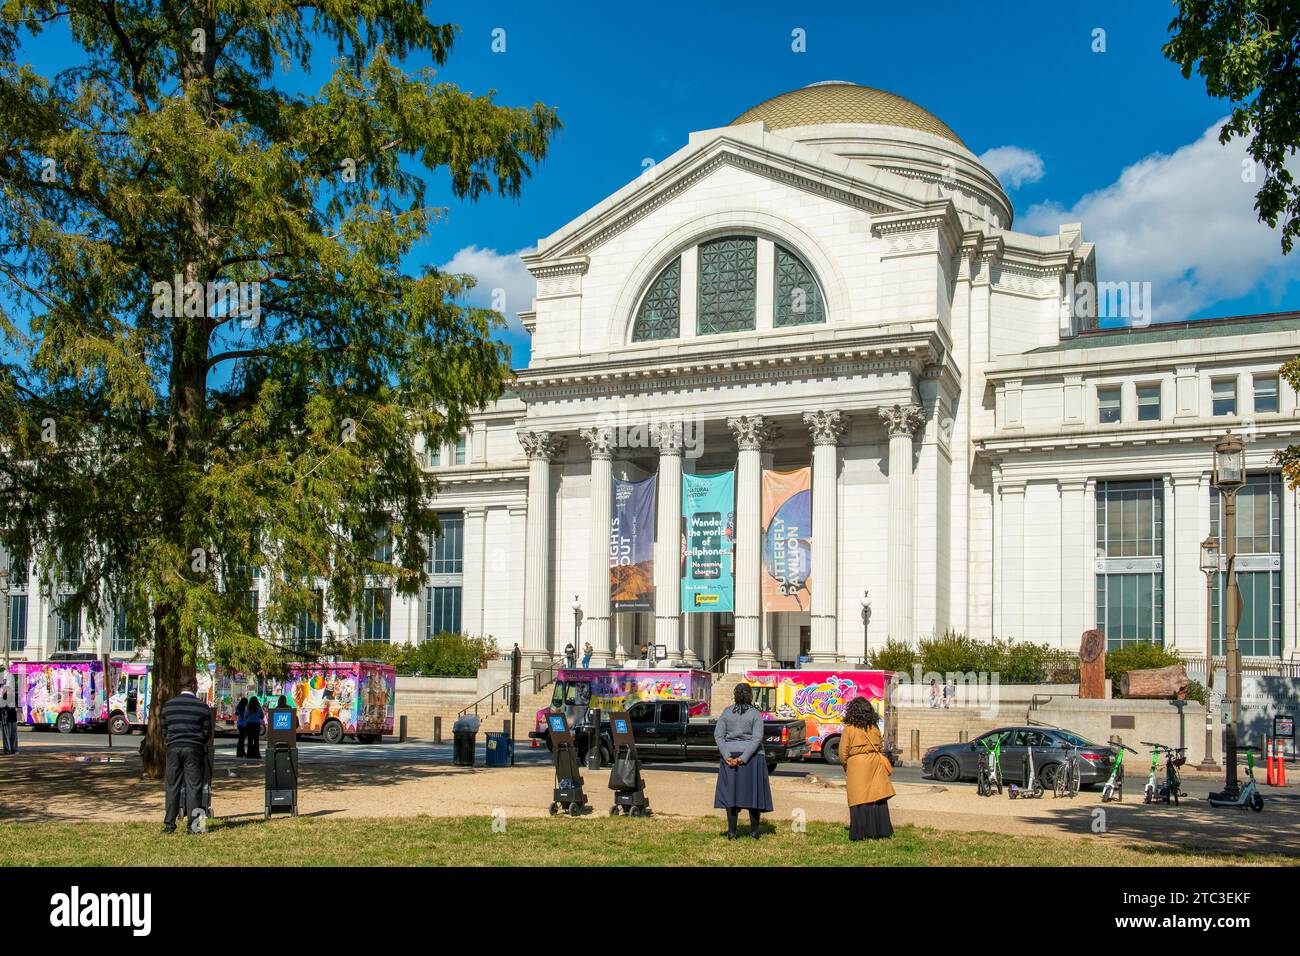 The Smithsonian National Museum of Natural History in Washington DC Stock Photo